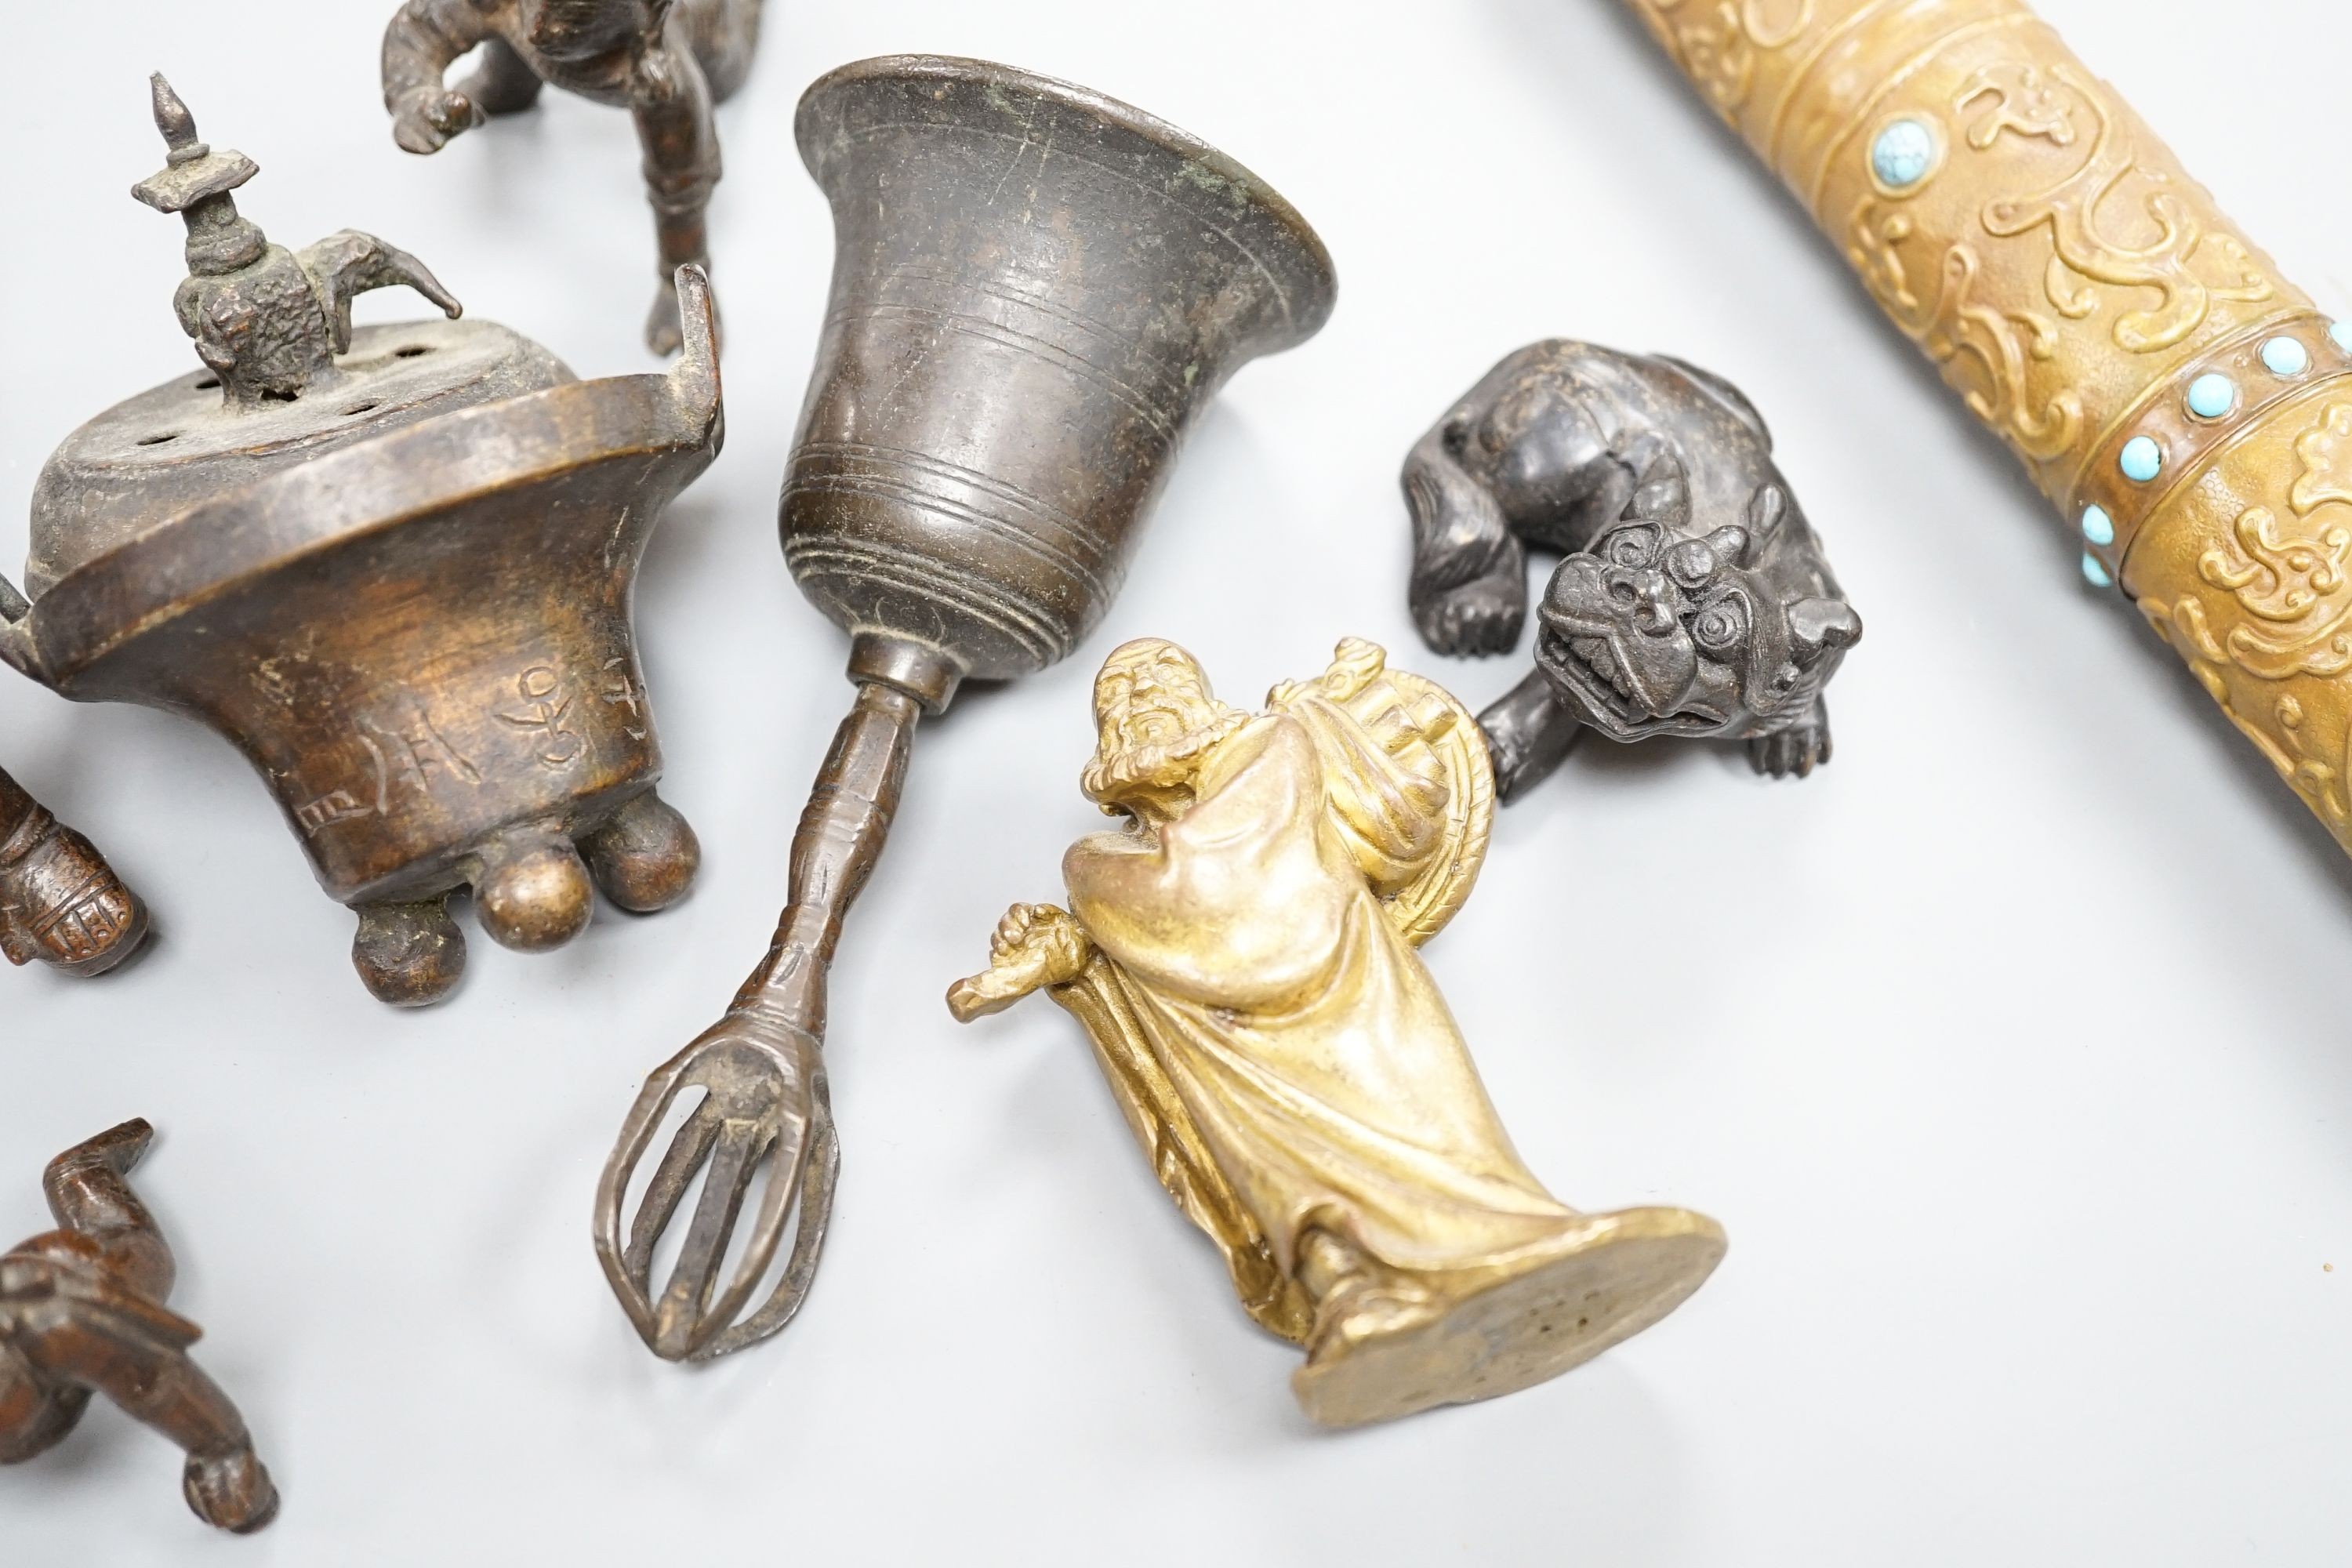 A Chinese gilt copper figure, a Chinese Dog of Fo, a bell, a censer, six Indian bronze figures and a scroll box